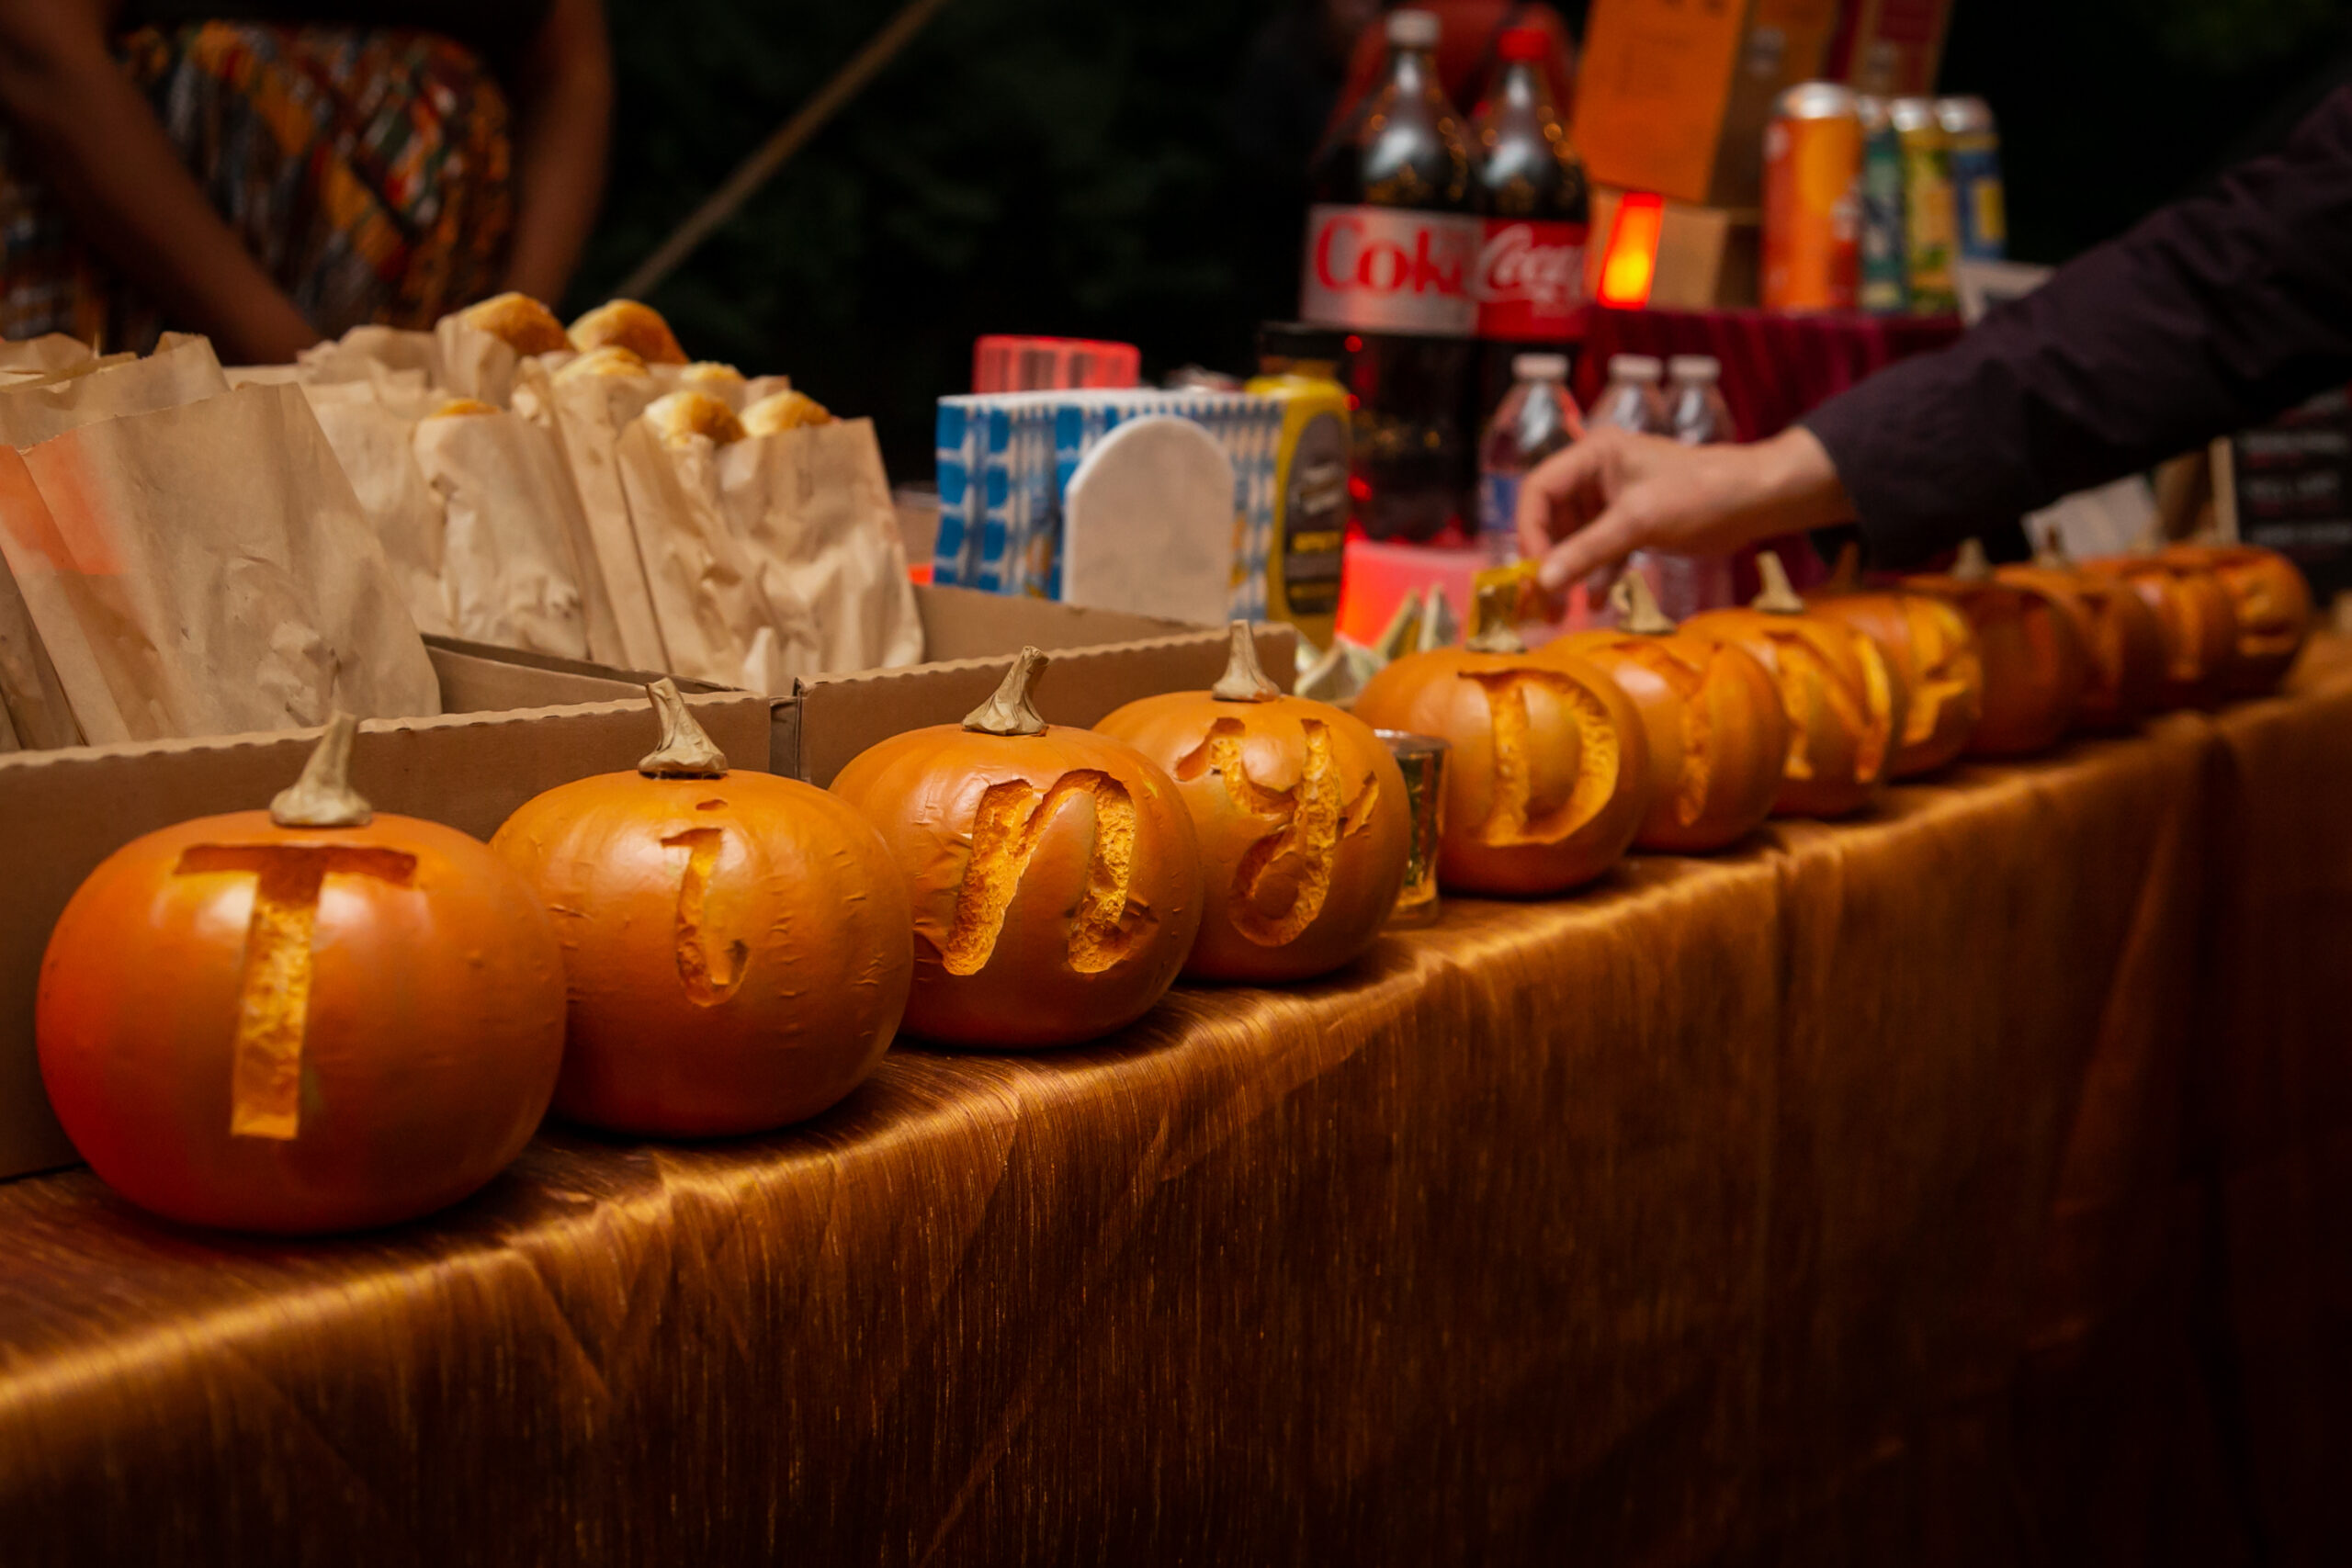 A row of small pumpkins with "Tiny Dynamite" carved into them, one letter at a time, in front of soft pretzels